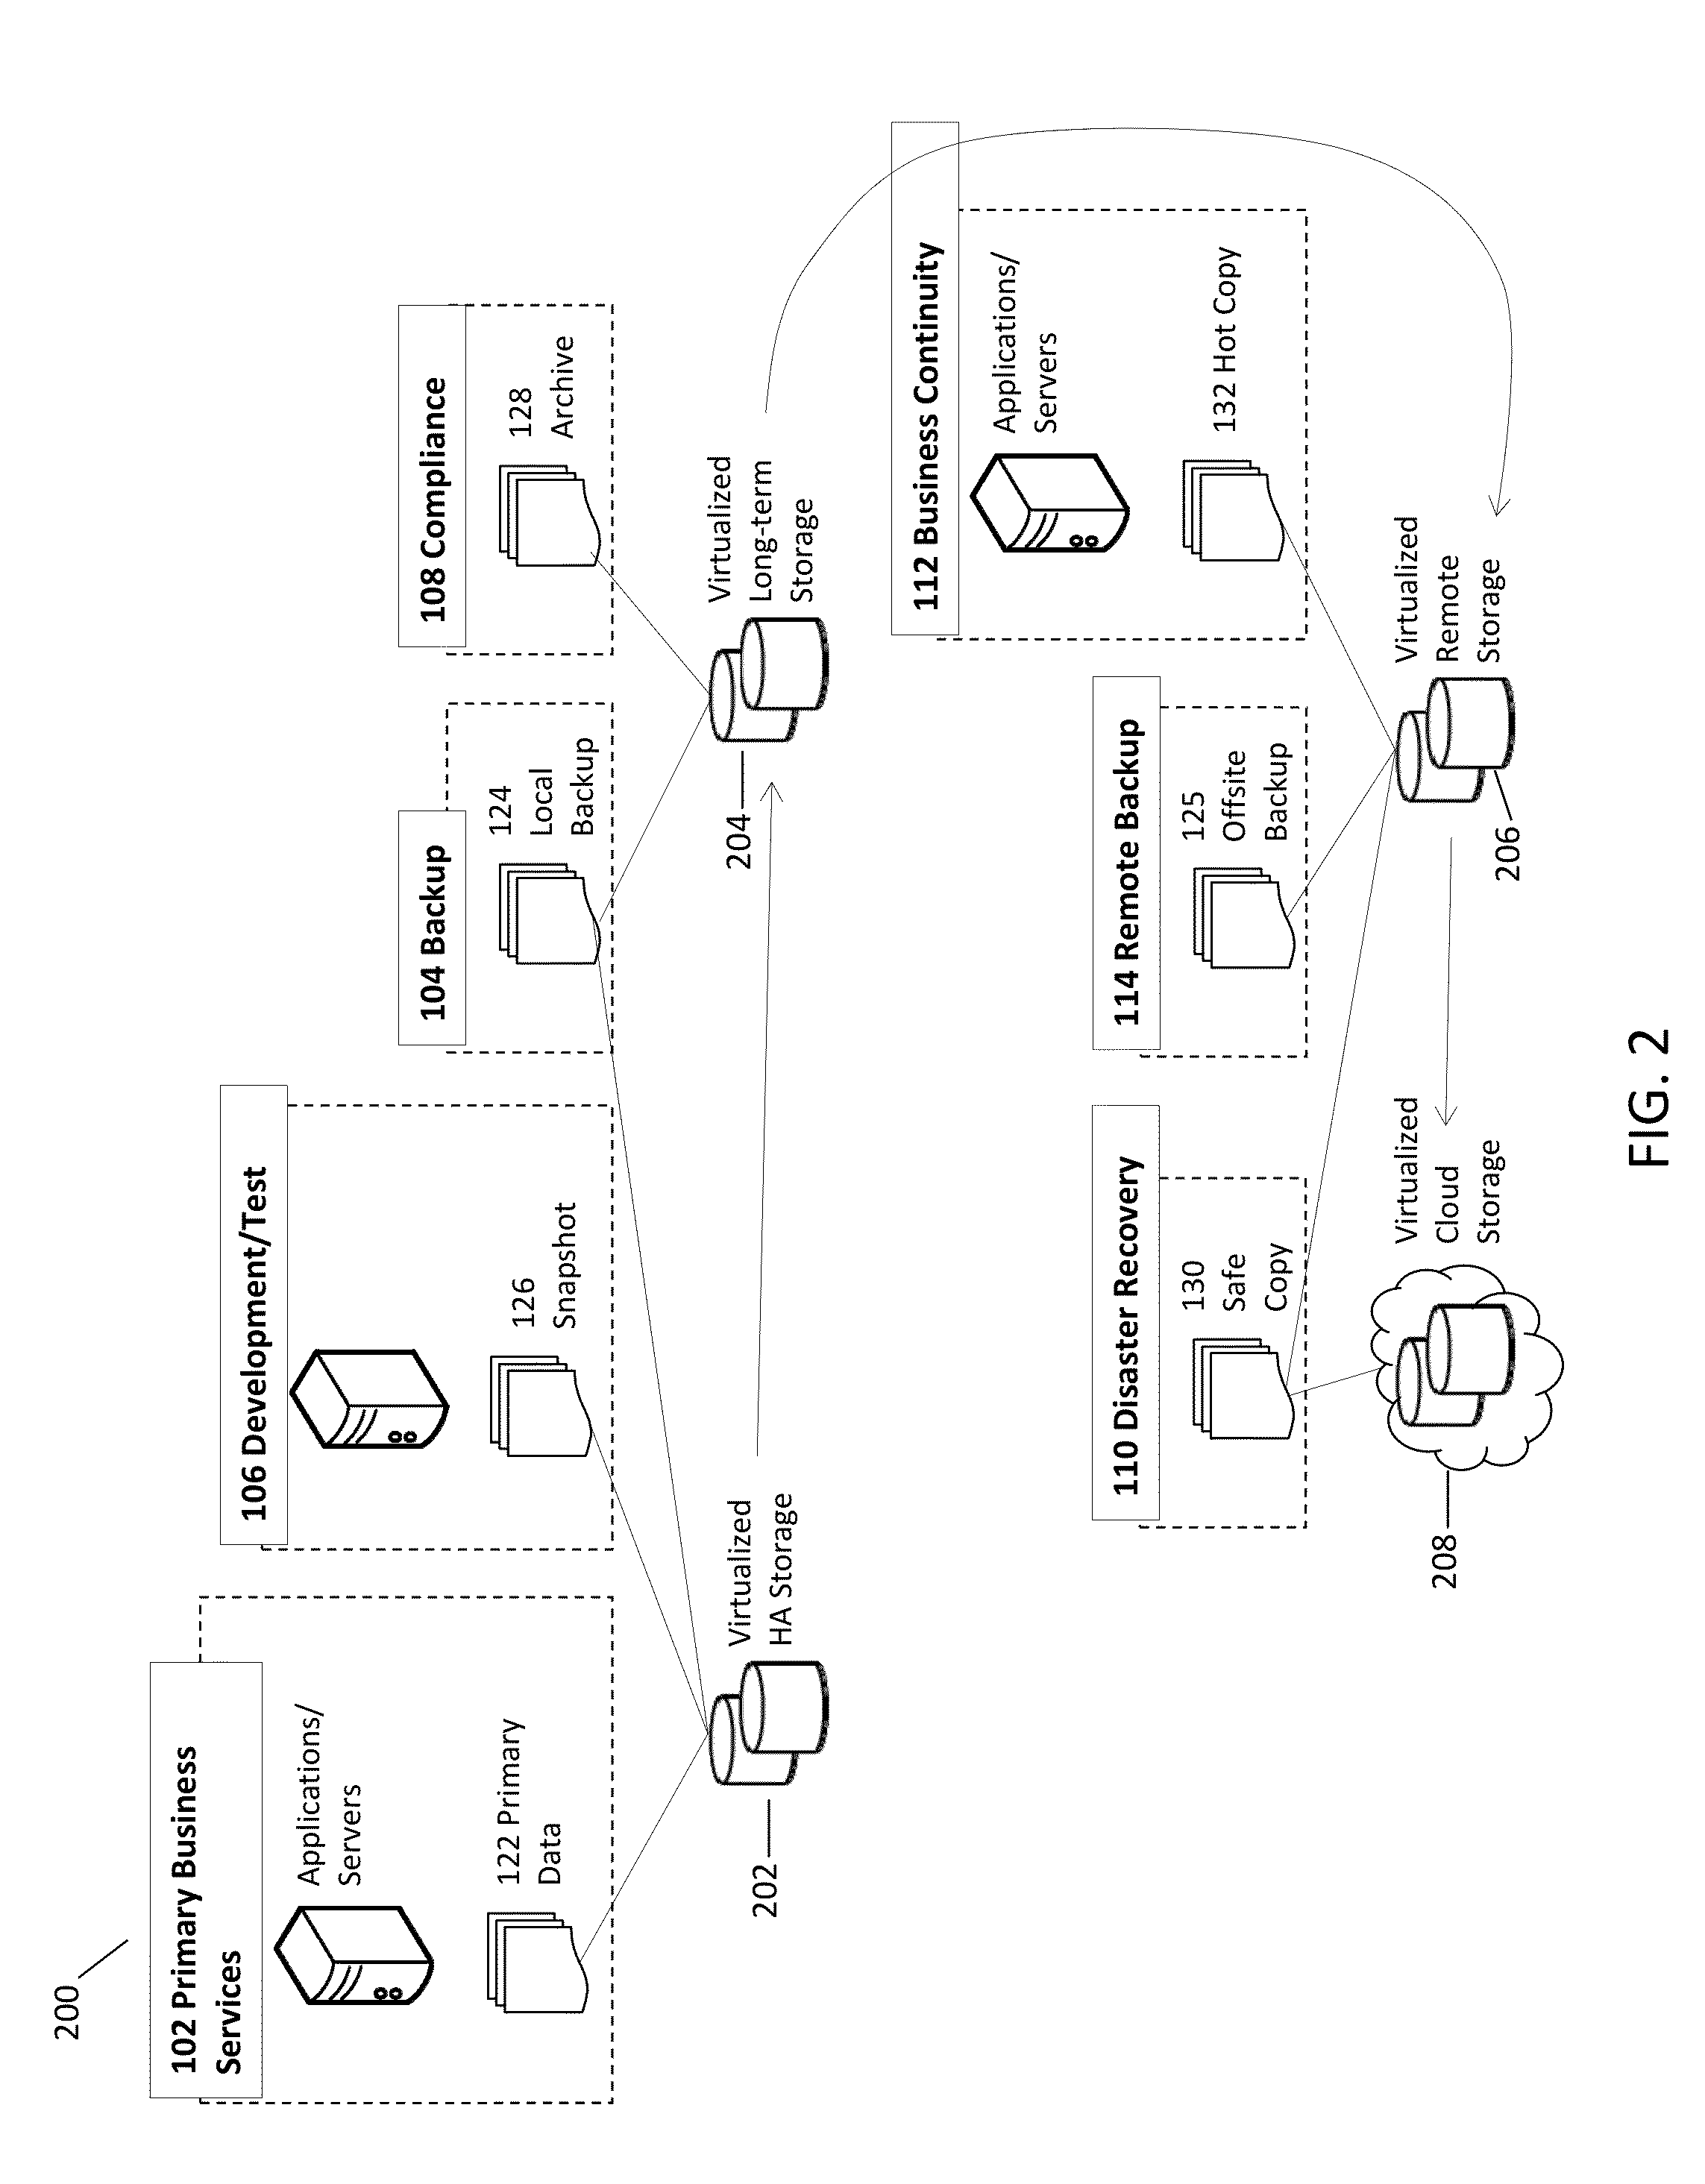 System and method for creating deduplicated copies of data by sending difference data between near-neighbor temporal states